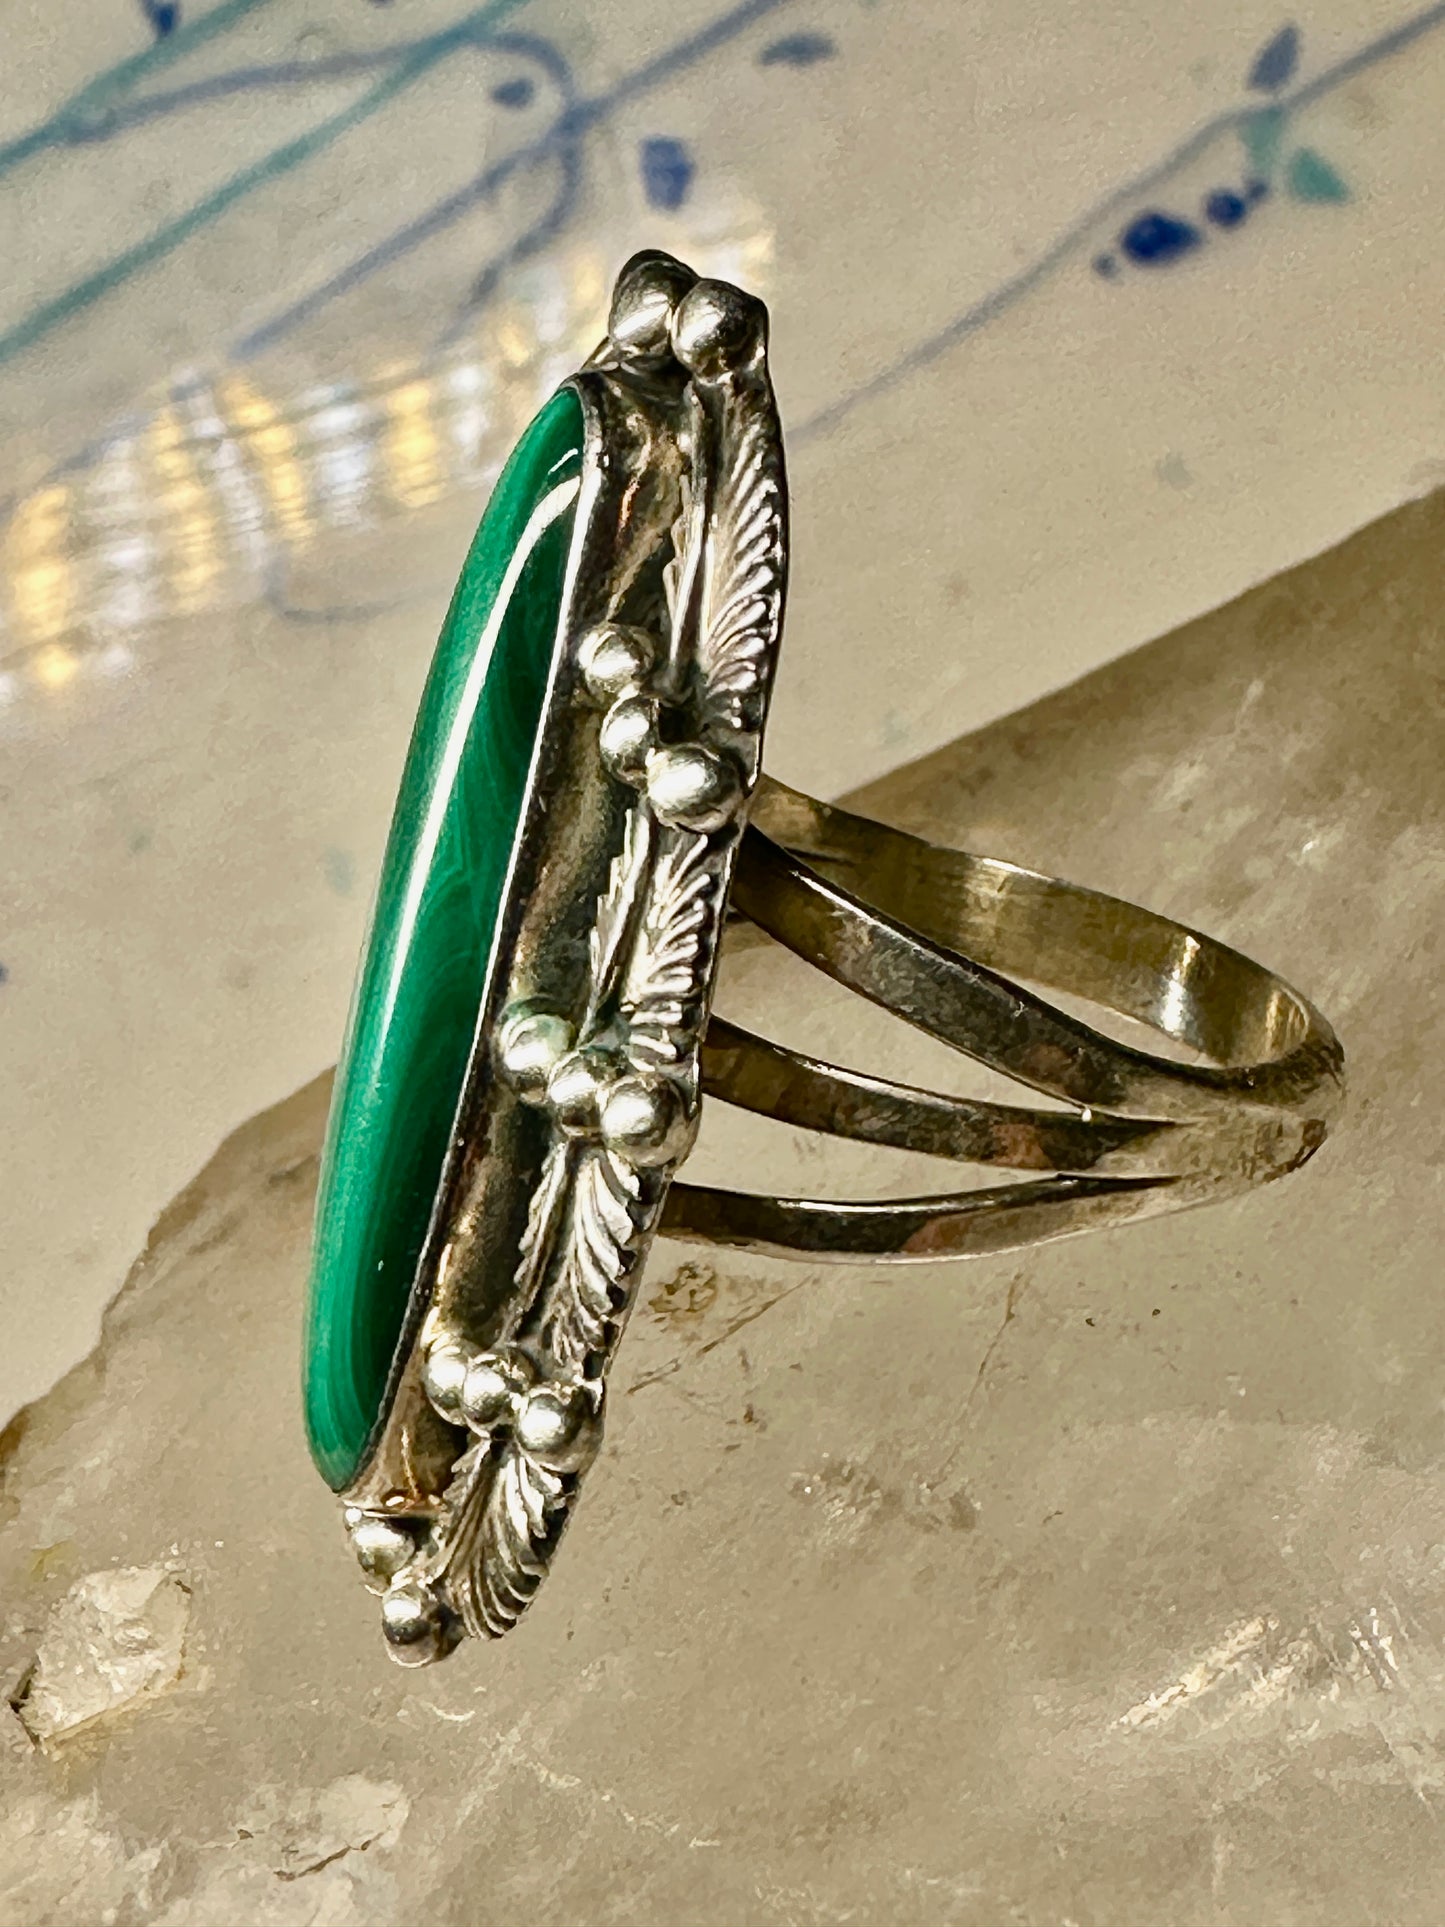 Long Malachite ring Navajo leaves feathers size 8.75 sterling silver women girls